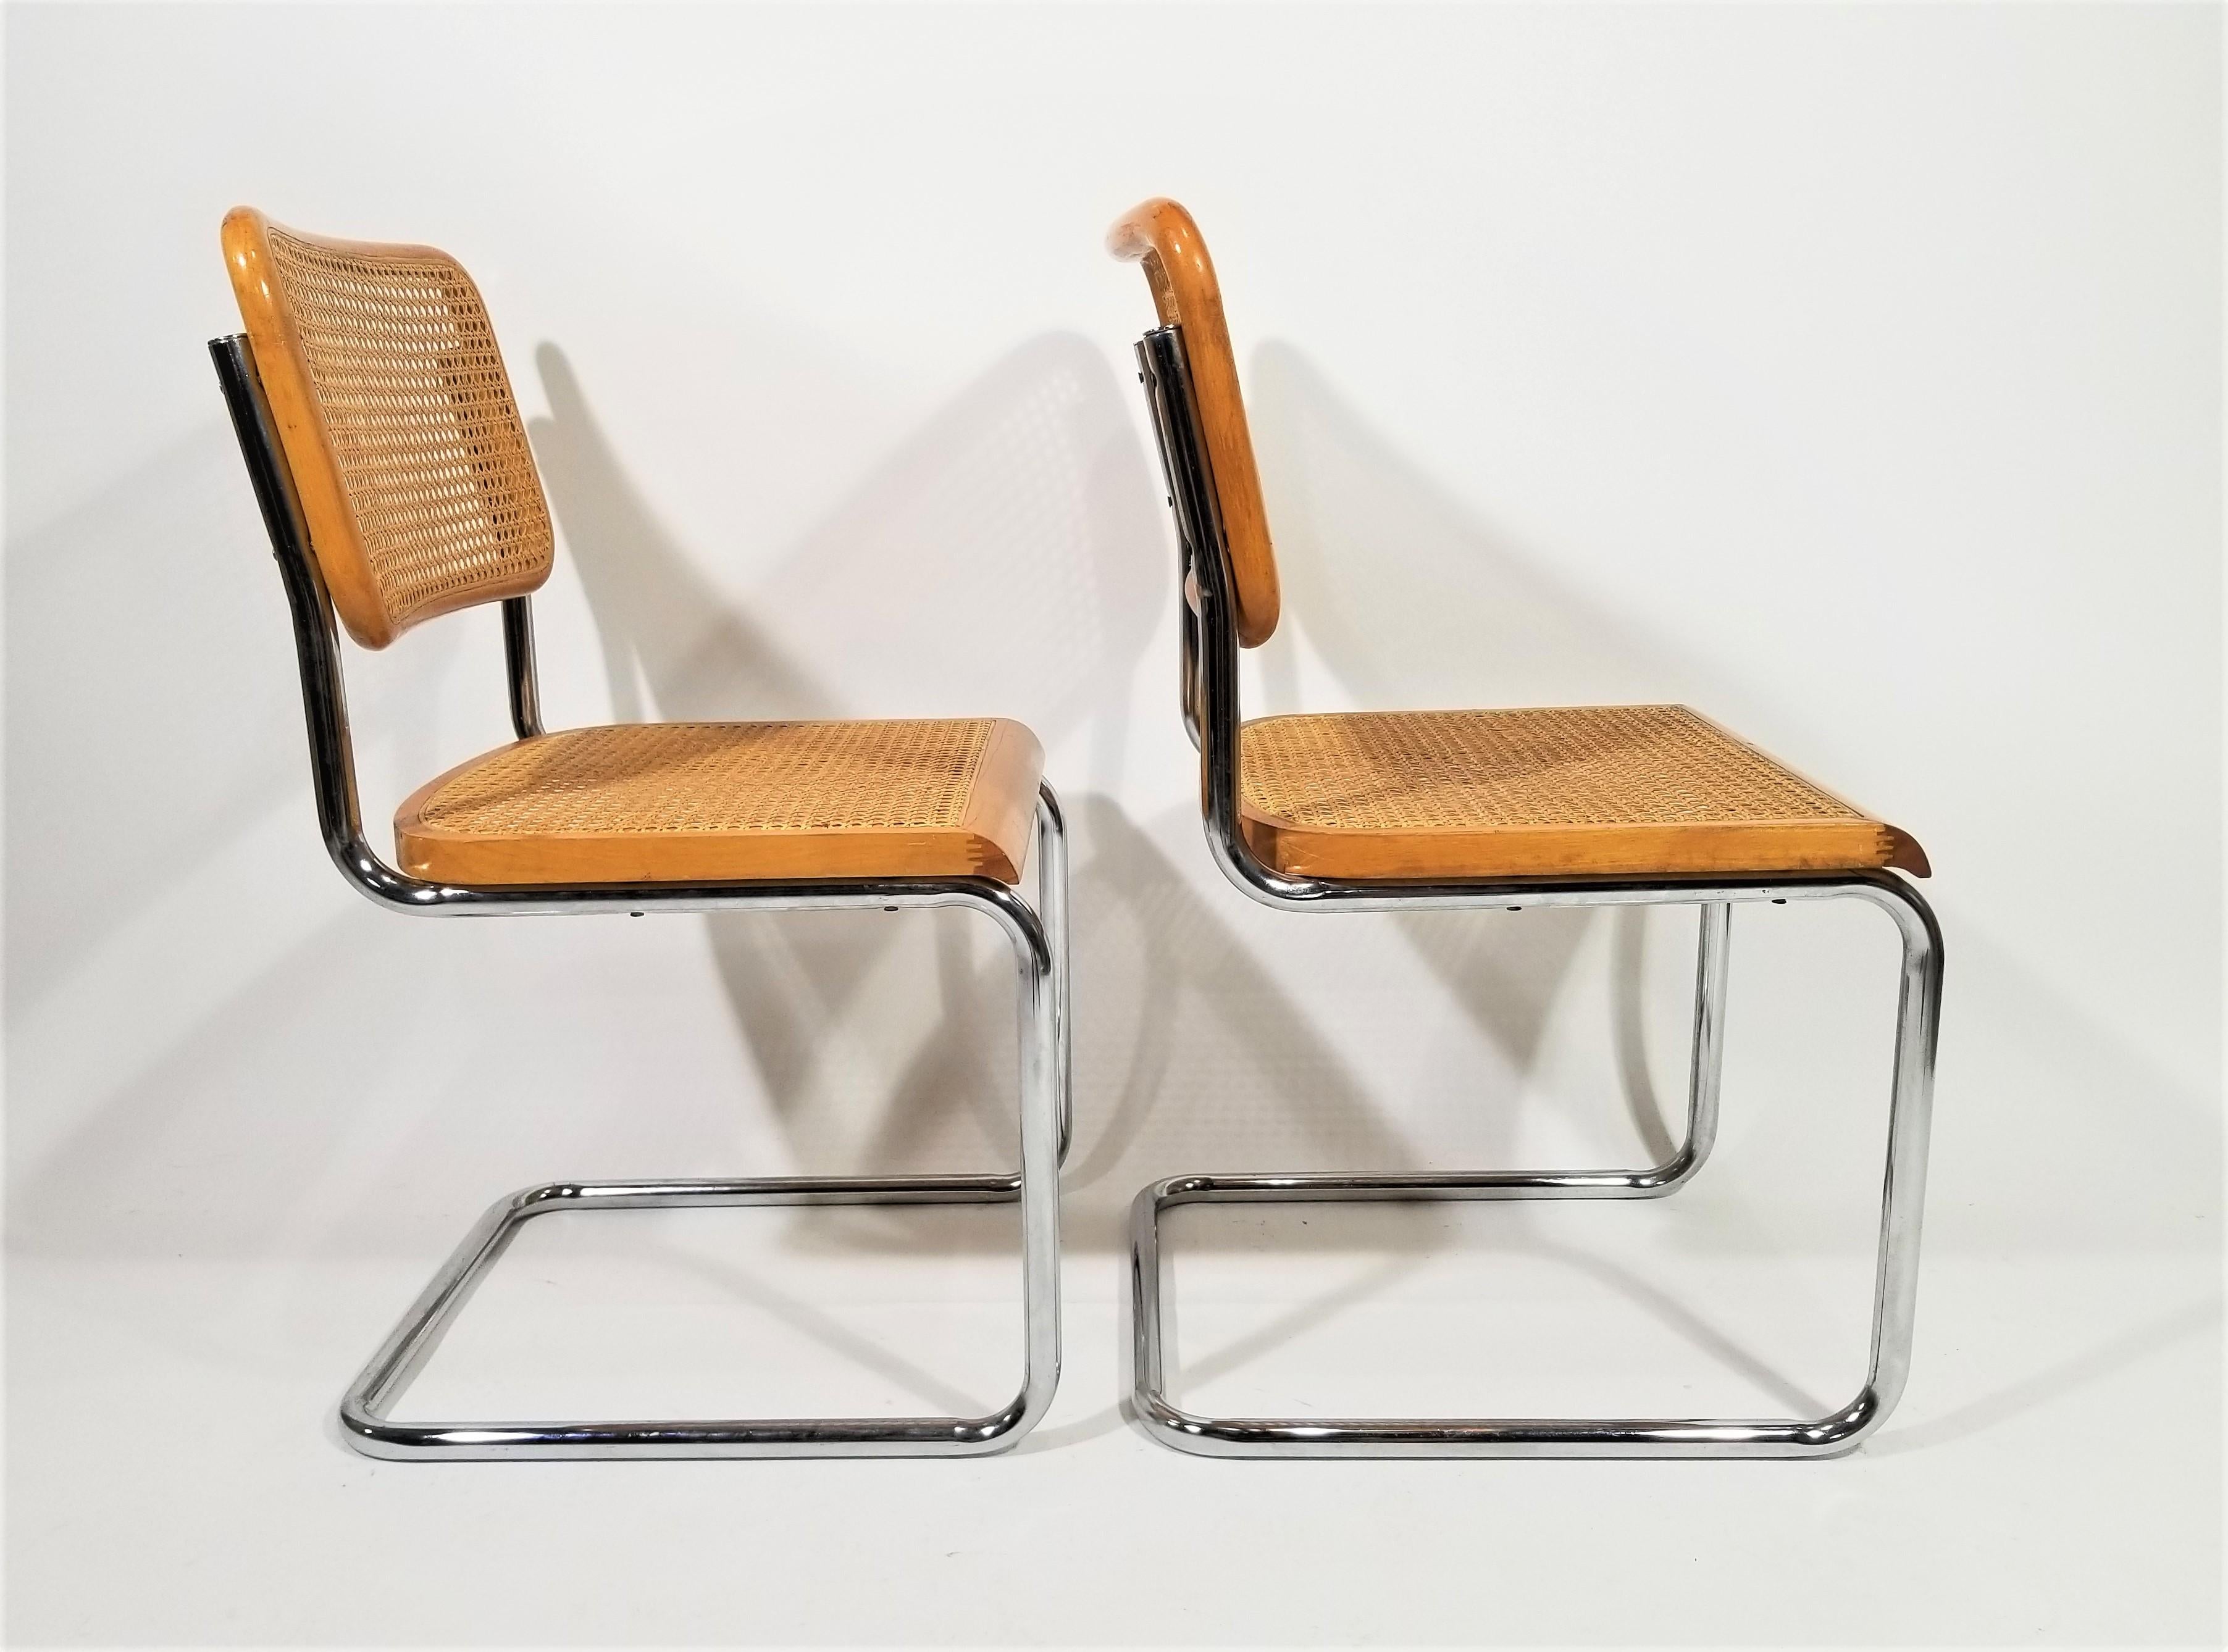  Marcel Breuer Cesca Chairs Mid Century Set of 4 For Sale 3